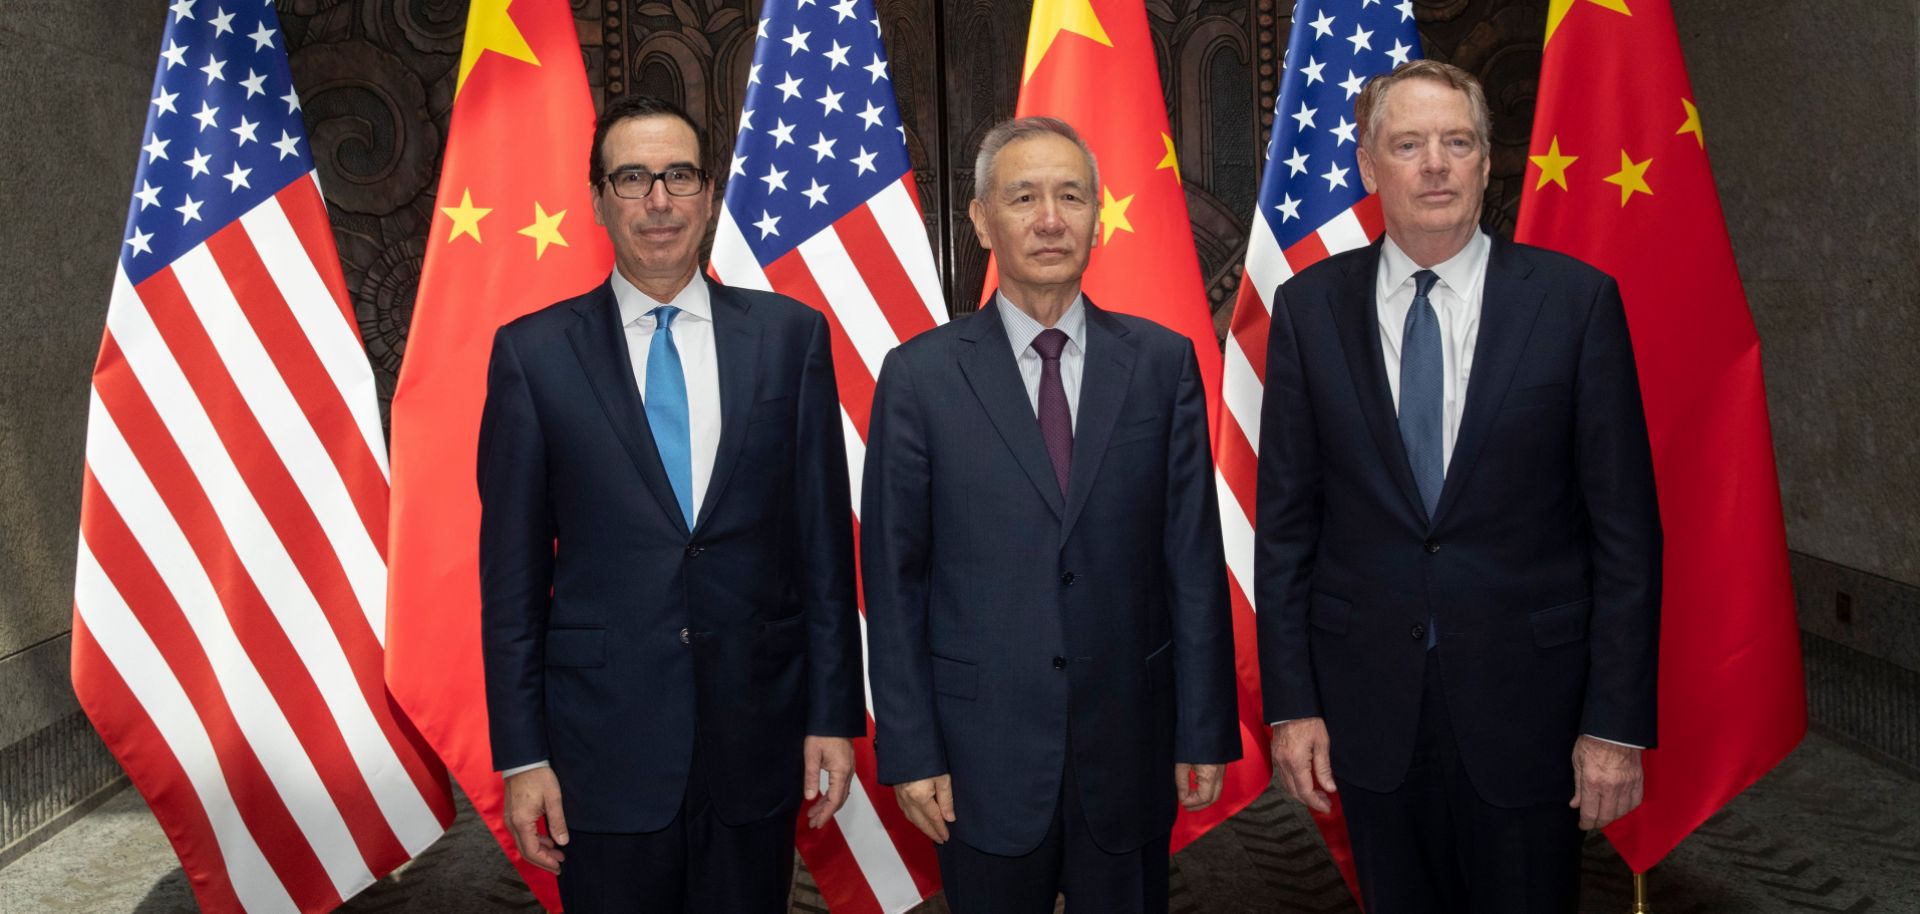 U.S. Treasury Secretary Steven Mnuchin (left) and U.S. Trade Representative Robert Lighthizer flank Chinese Vice Premier Liu He as they pose for photographs before holding trade talks in Shanghai on July 31, 2019.